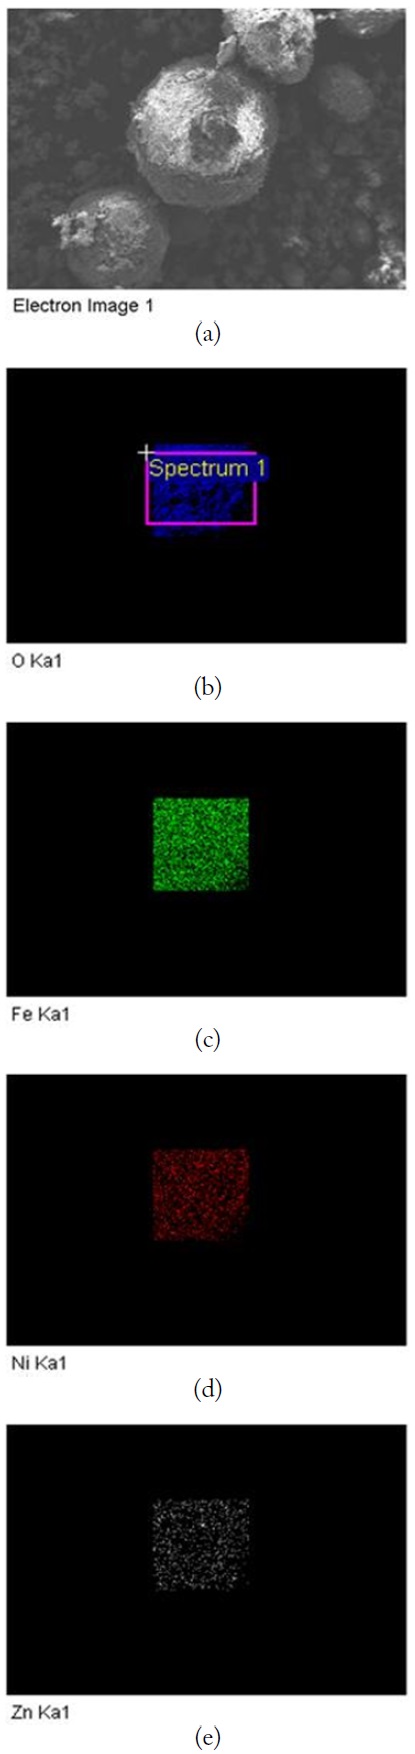 SEM-EDX images of dispersed elements in LiNiZn-ferrite particle: (a) SEM image, (b) O, (c) Fe, (d) Ni, (e) Zn.